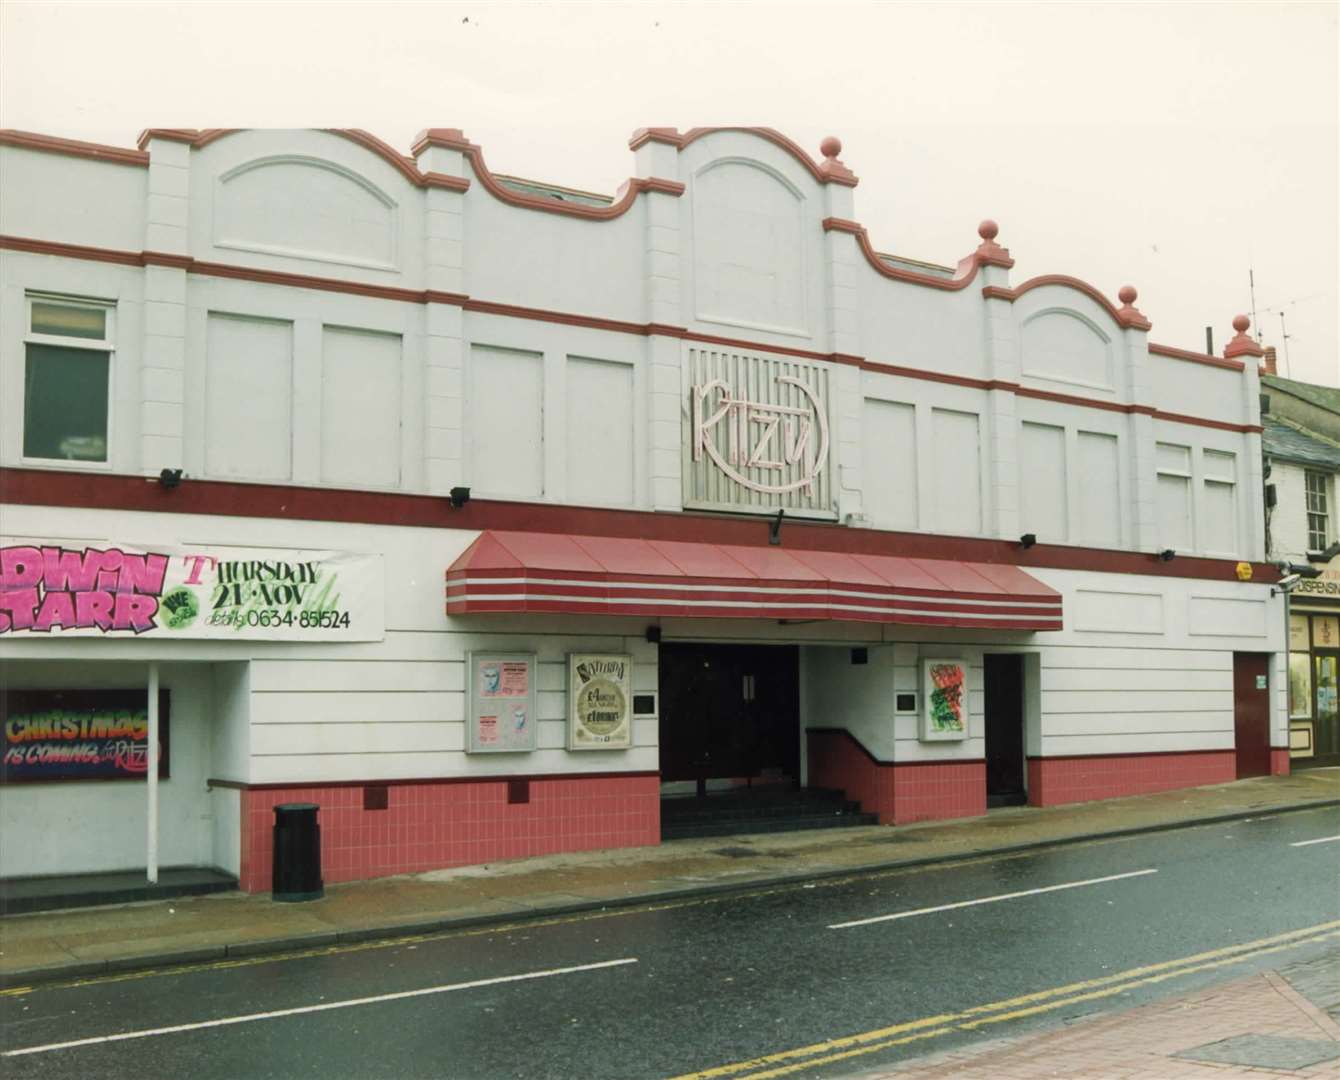 The Ritzy nightclub (formerly Joanna's) in Canterbury Street, Gillingham, on December 6, 1991. It later became MooMoo Clubrooms, which closed in late 2019